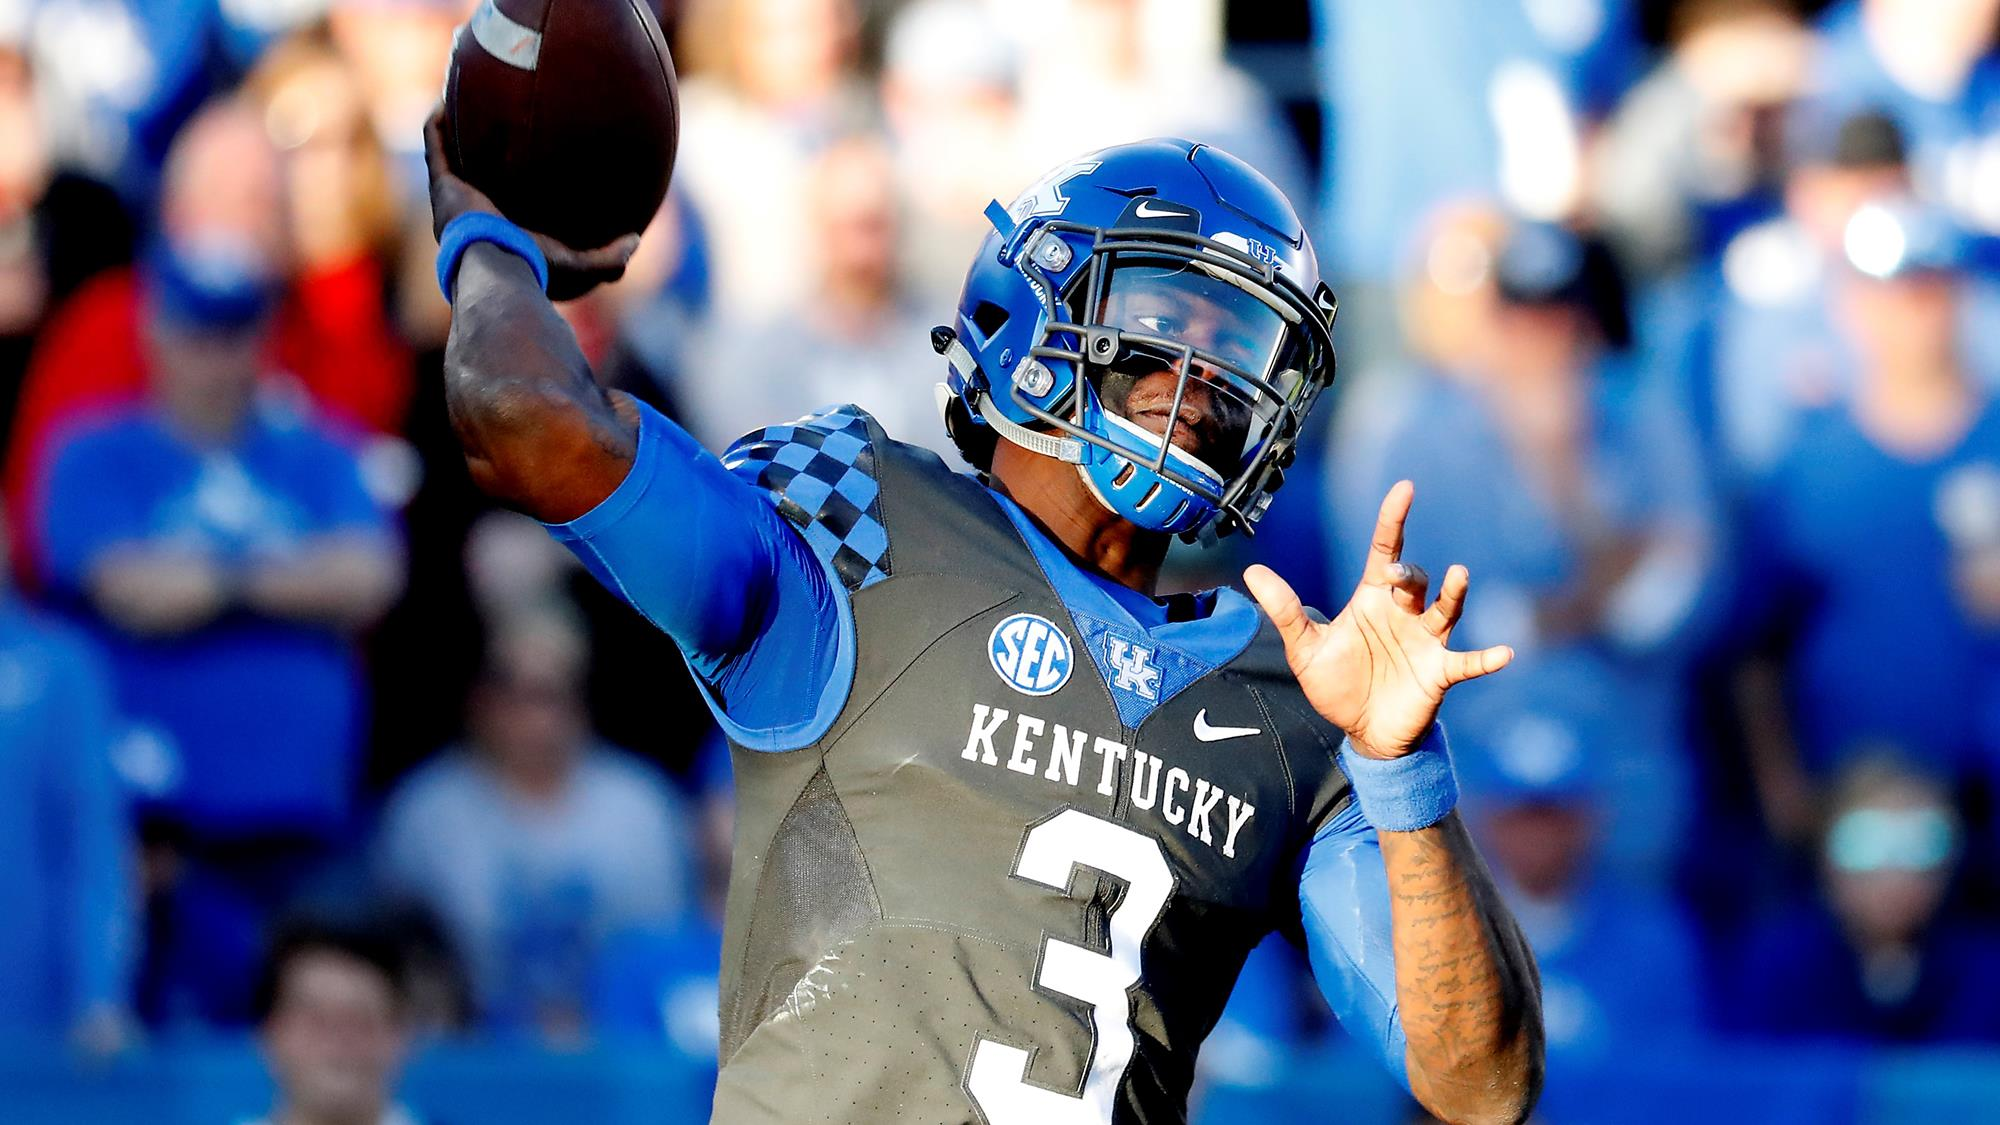 UK Eying Complete Offensive Performance behind Rejuvenated Wilson